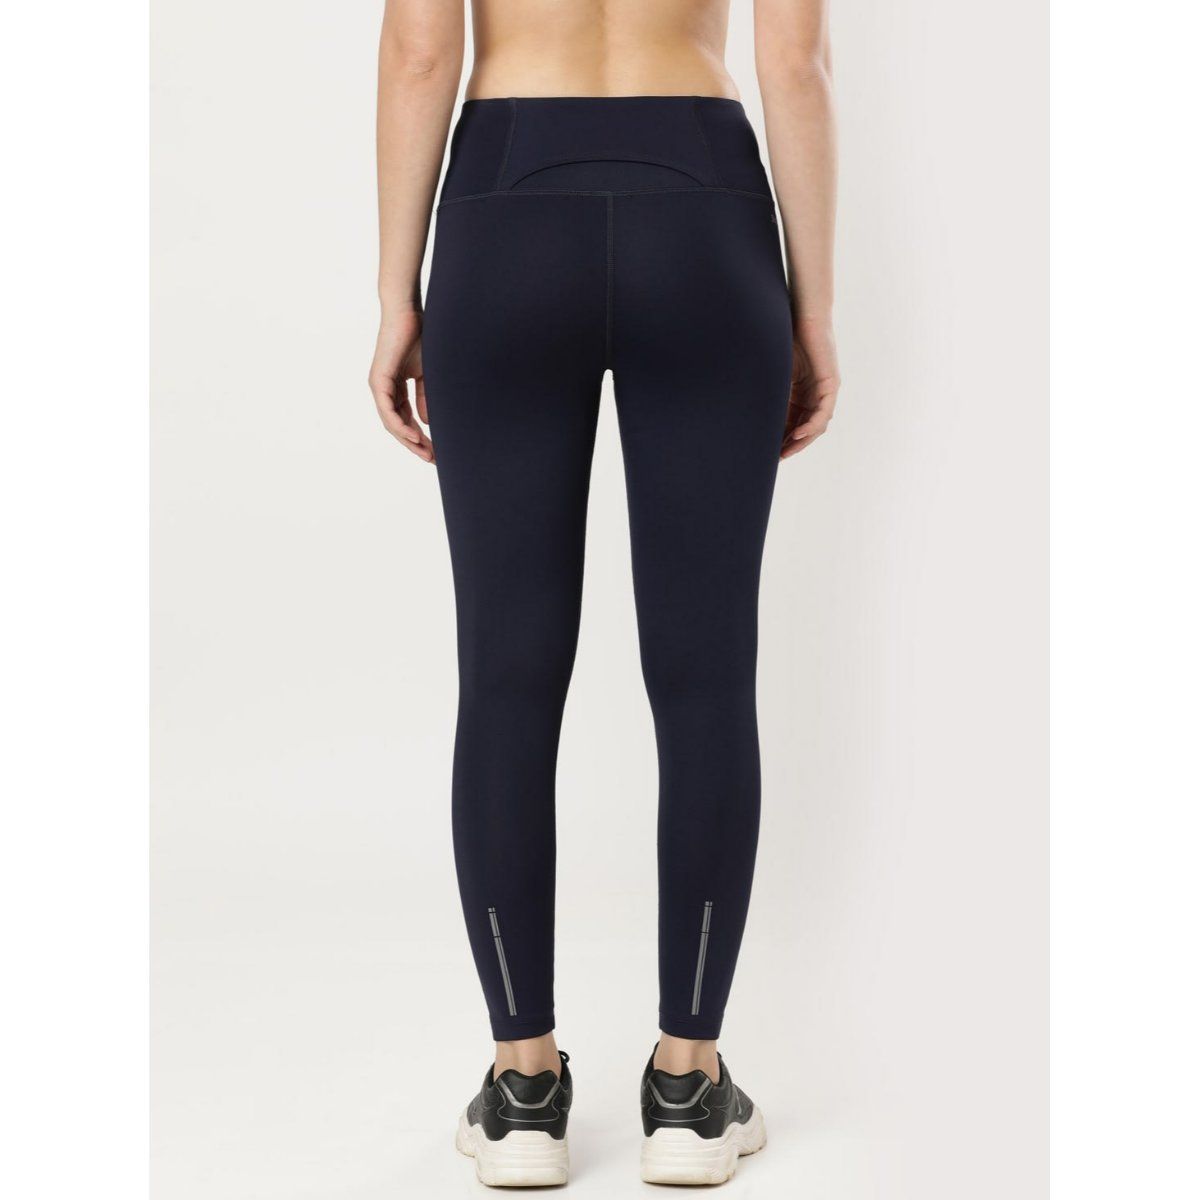 Buy Jockey 2523 Thermal Leggings With Elasticated Waistband Black M Online  at Low Prices in India at Bigdeals24x7.com